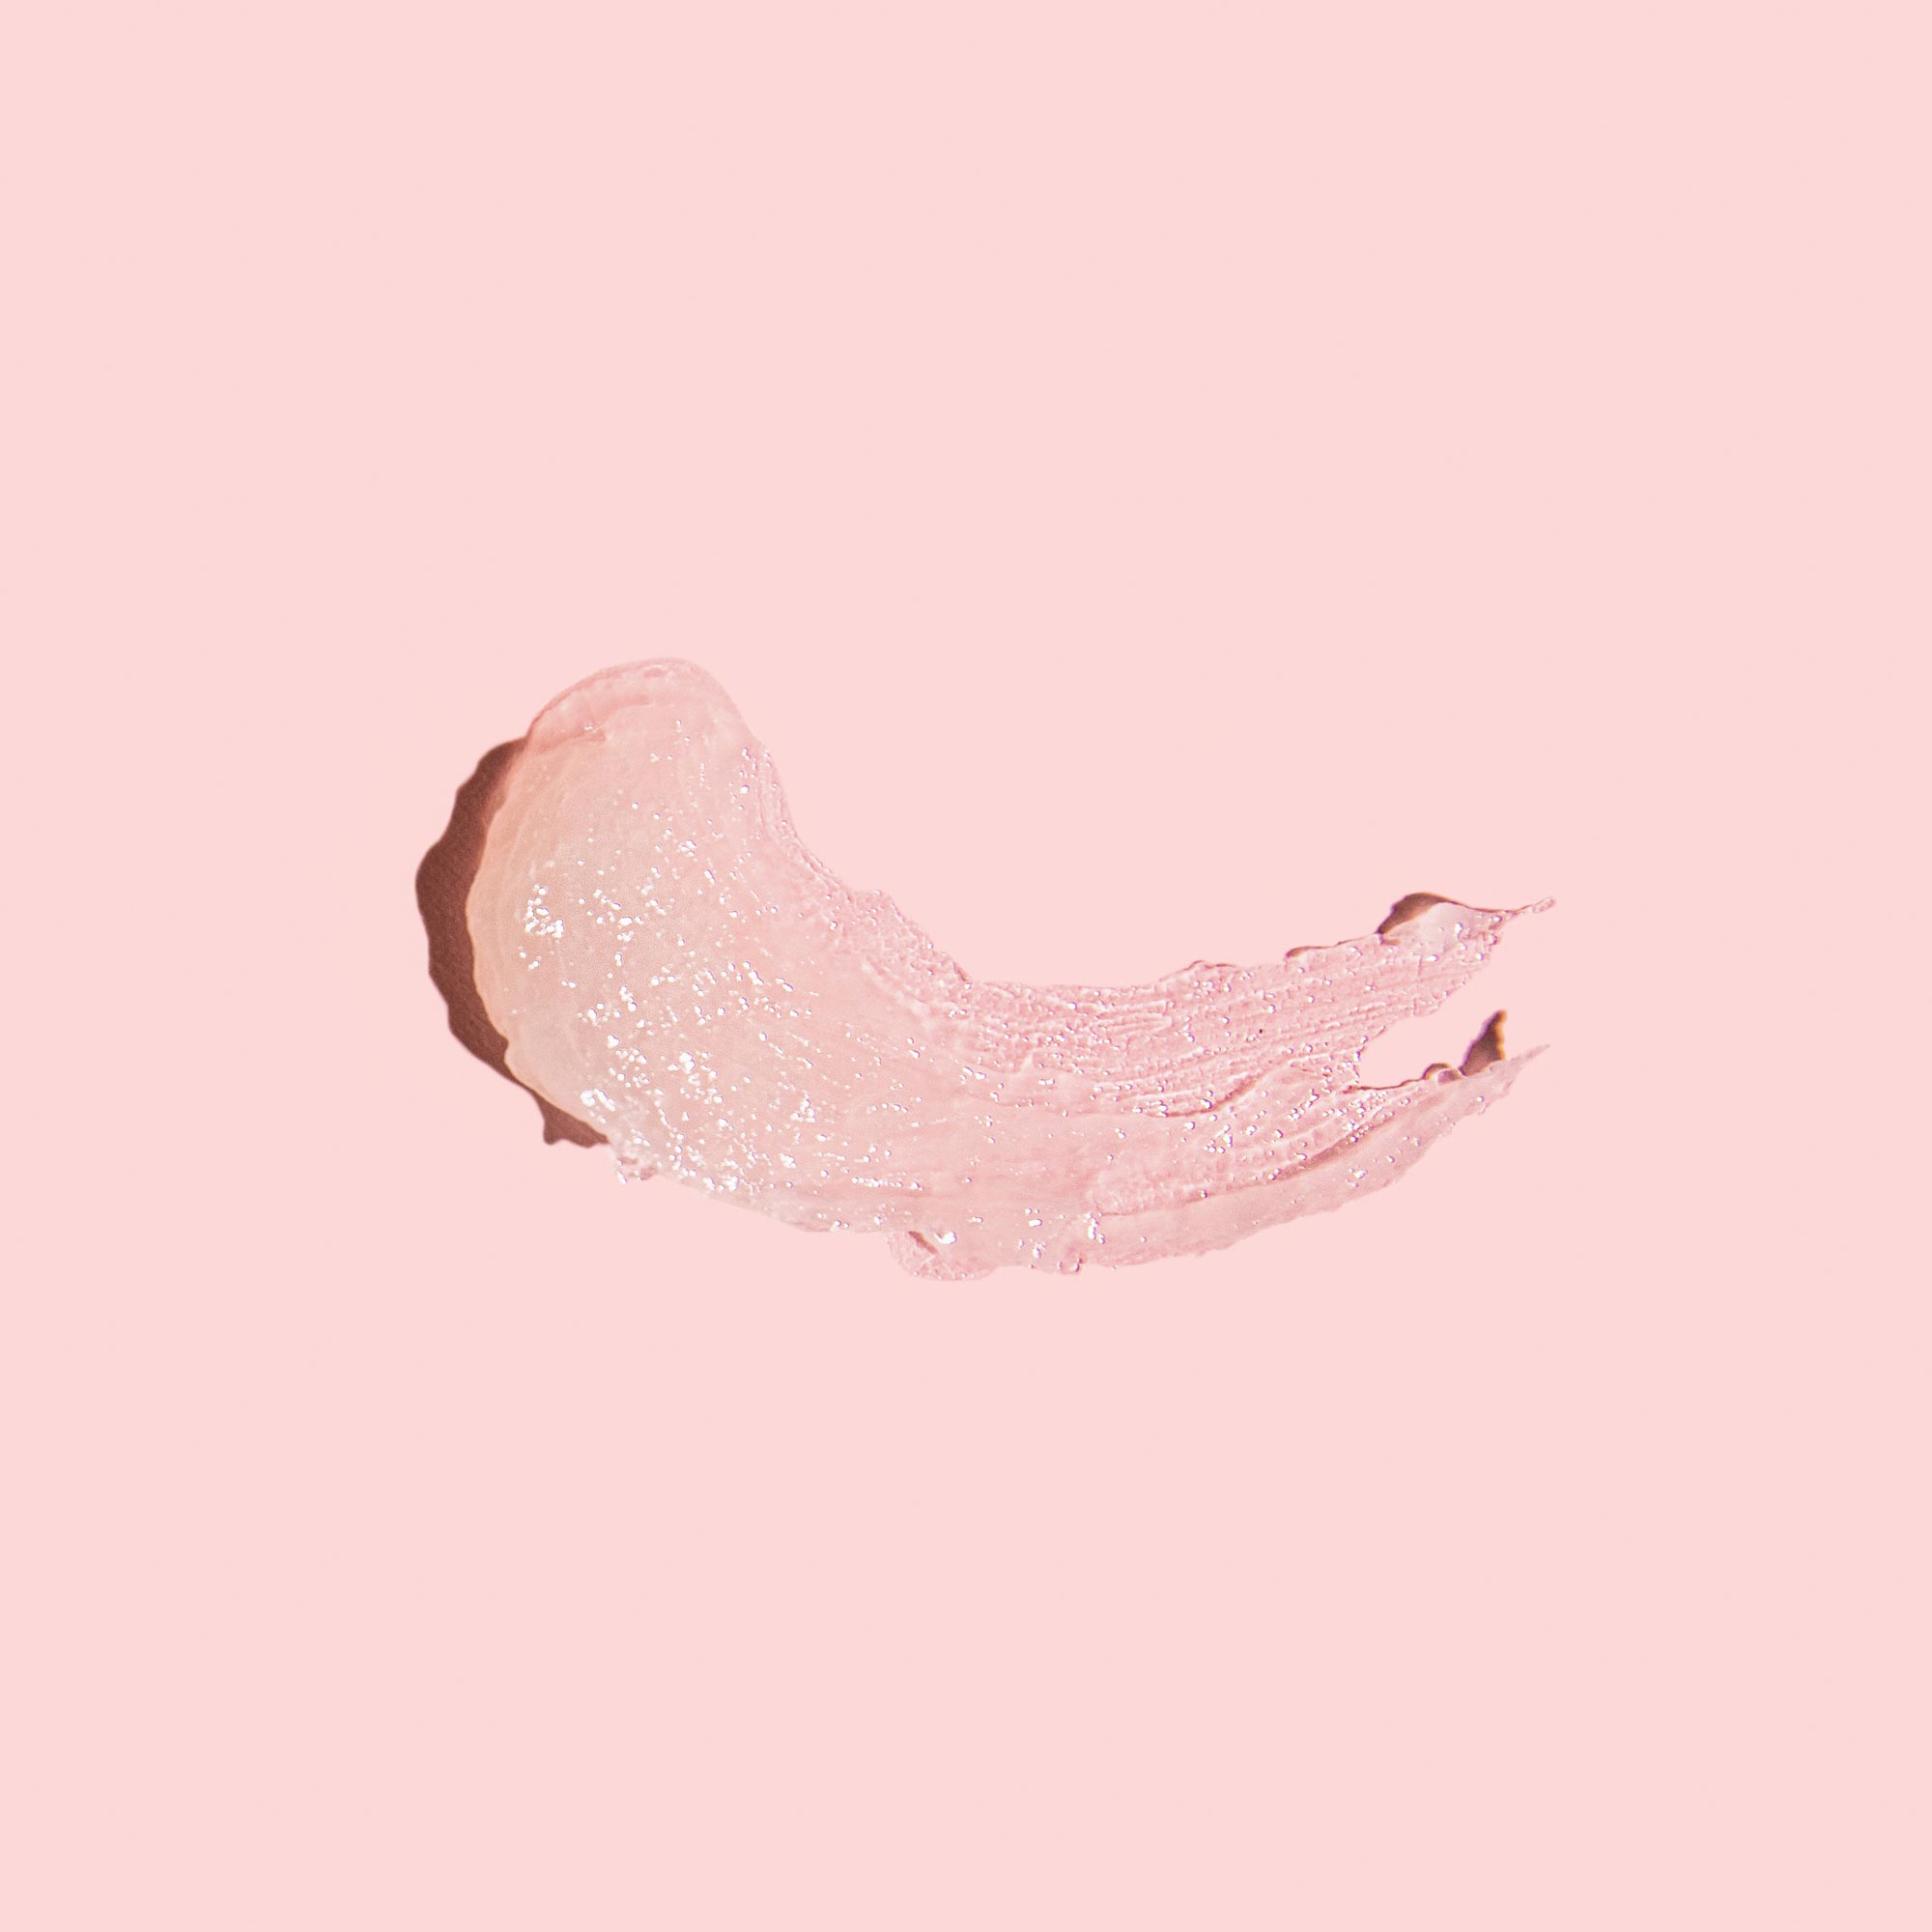 Smear of Acyclovir cream to treat oral and genital herpes on a pink background